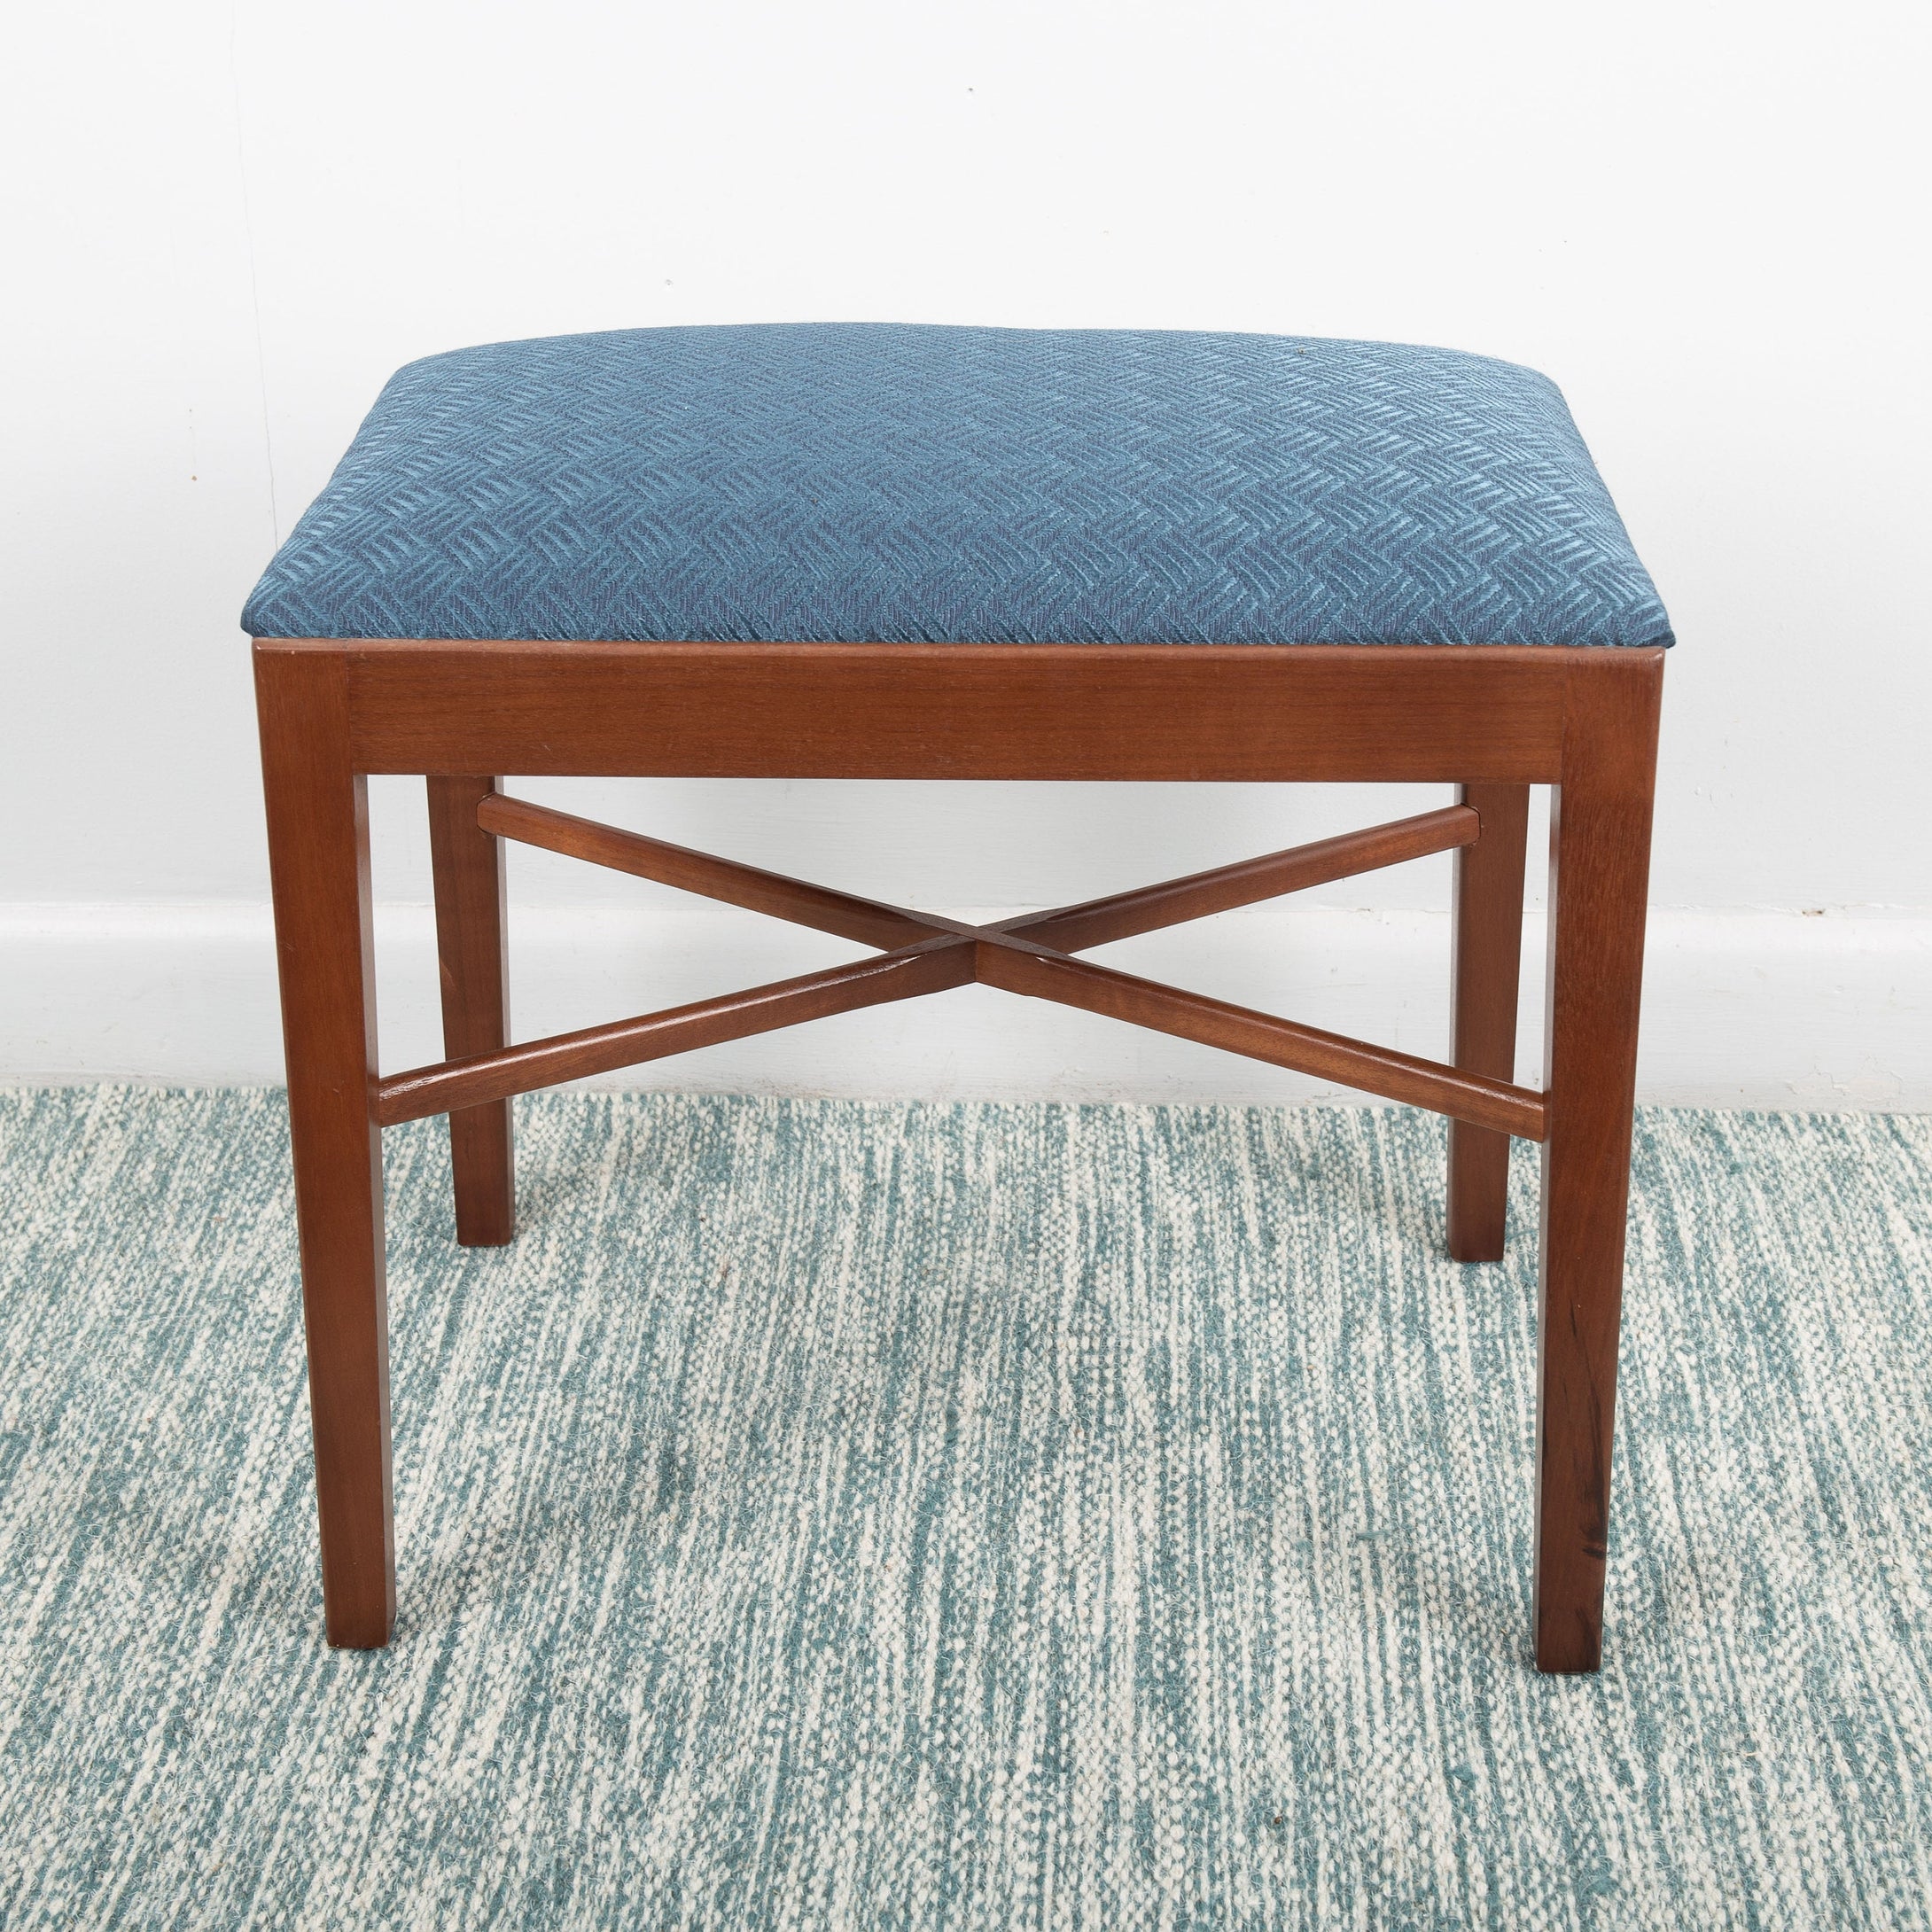 Walnut Dressing Table Foot Stool made by Meredew Furniture